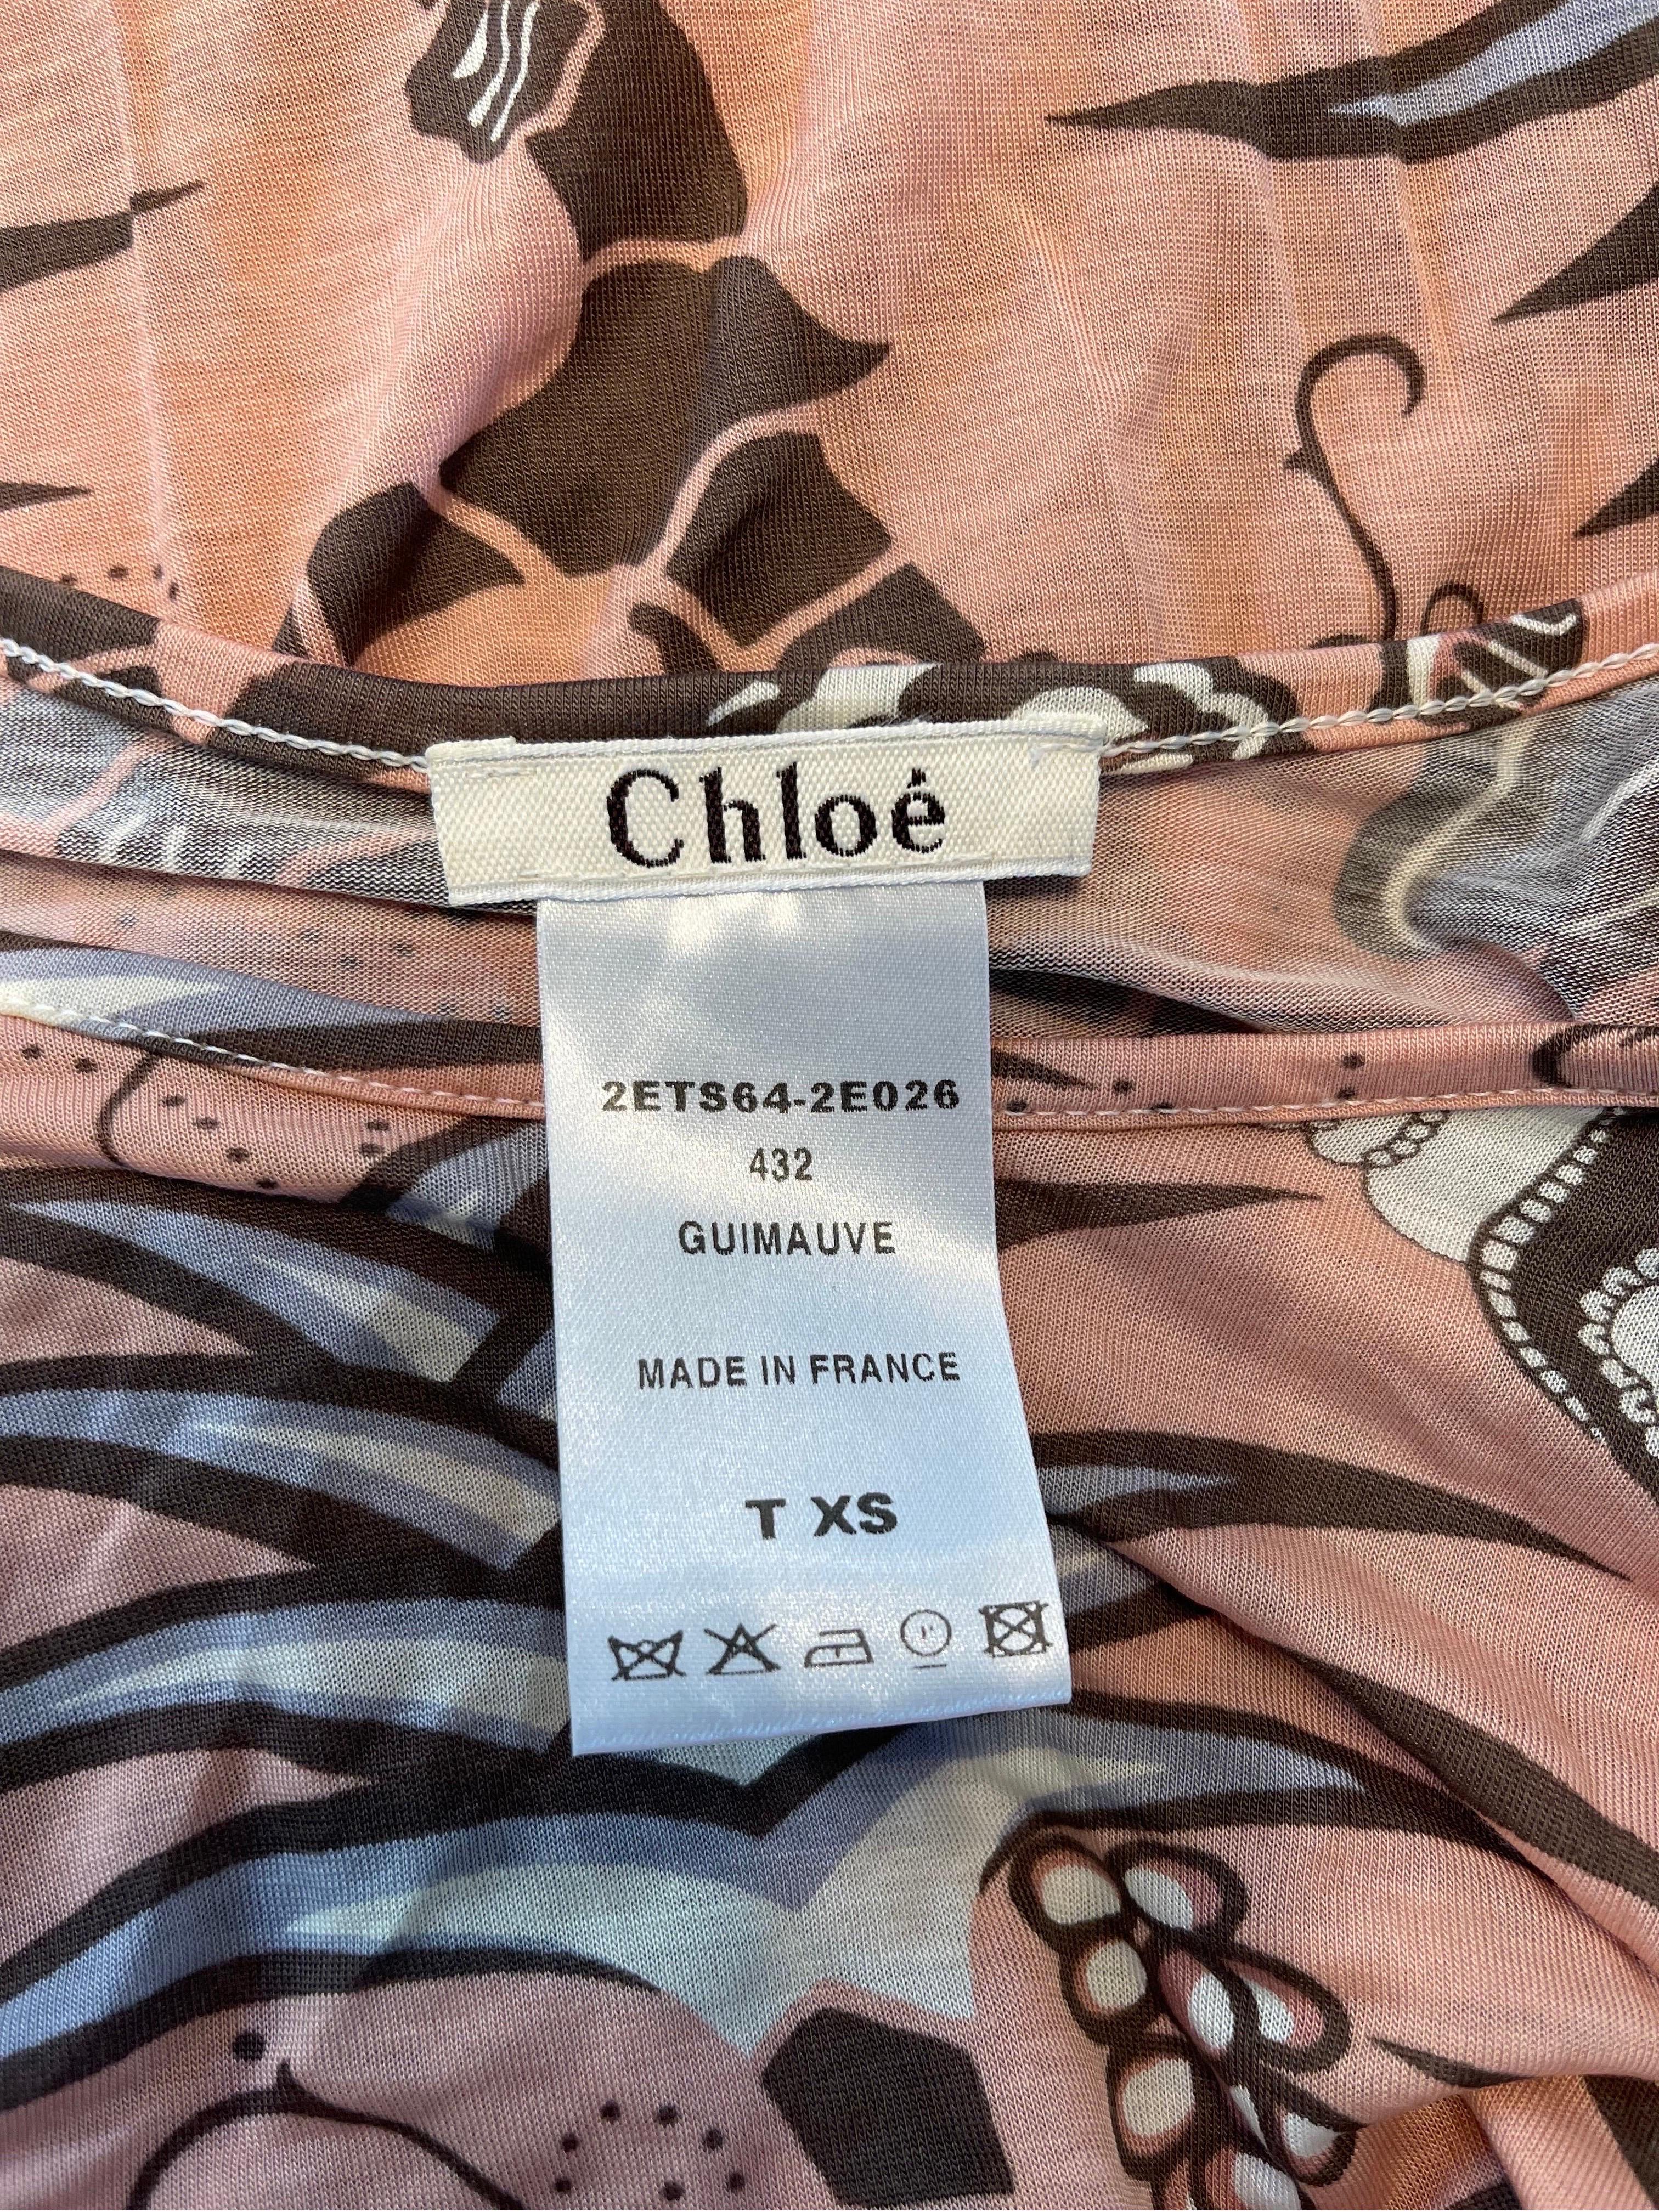 Rare and collectible Spring / Summer 2002 CHLOE by PHOEBE PHILO novelty monkey and butterfly print long sleeve top ! This amazing blouse is from Philo’s premiere collection for the house of Chloe. Soft rayon stretches to fit. Pink / salmon color,